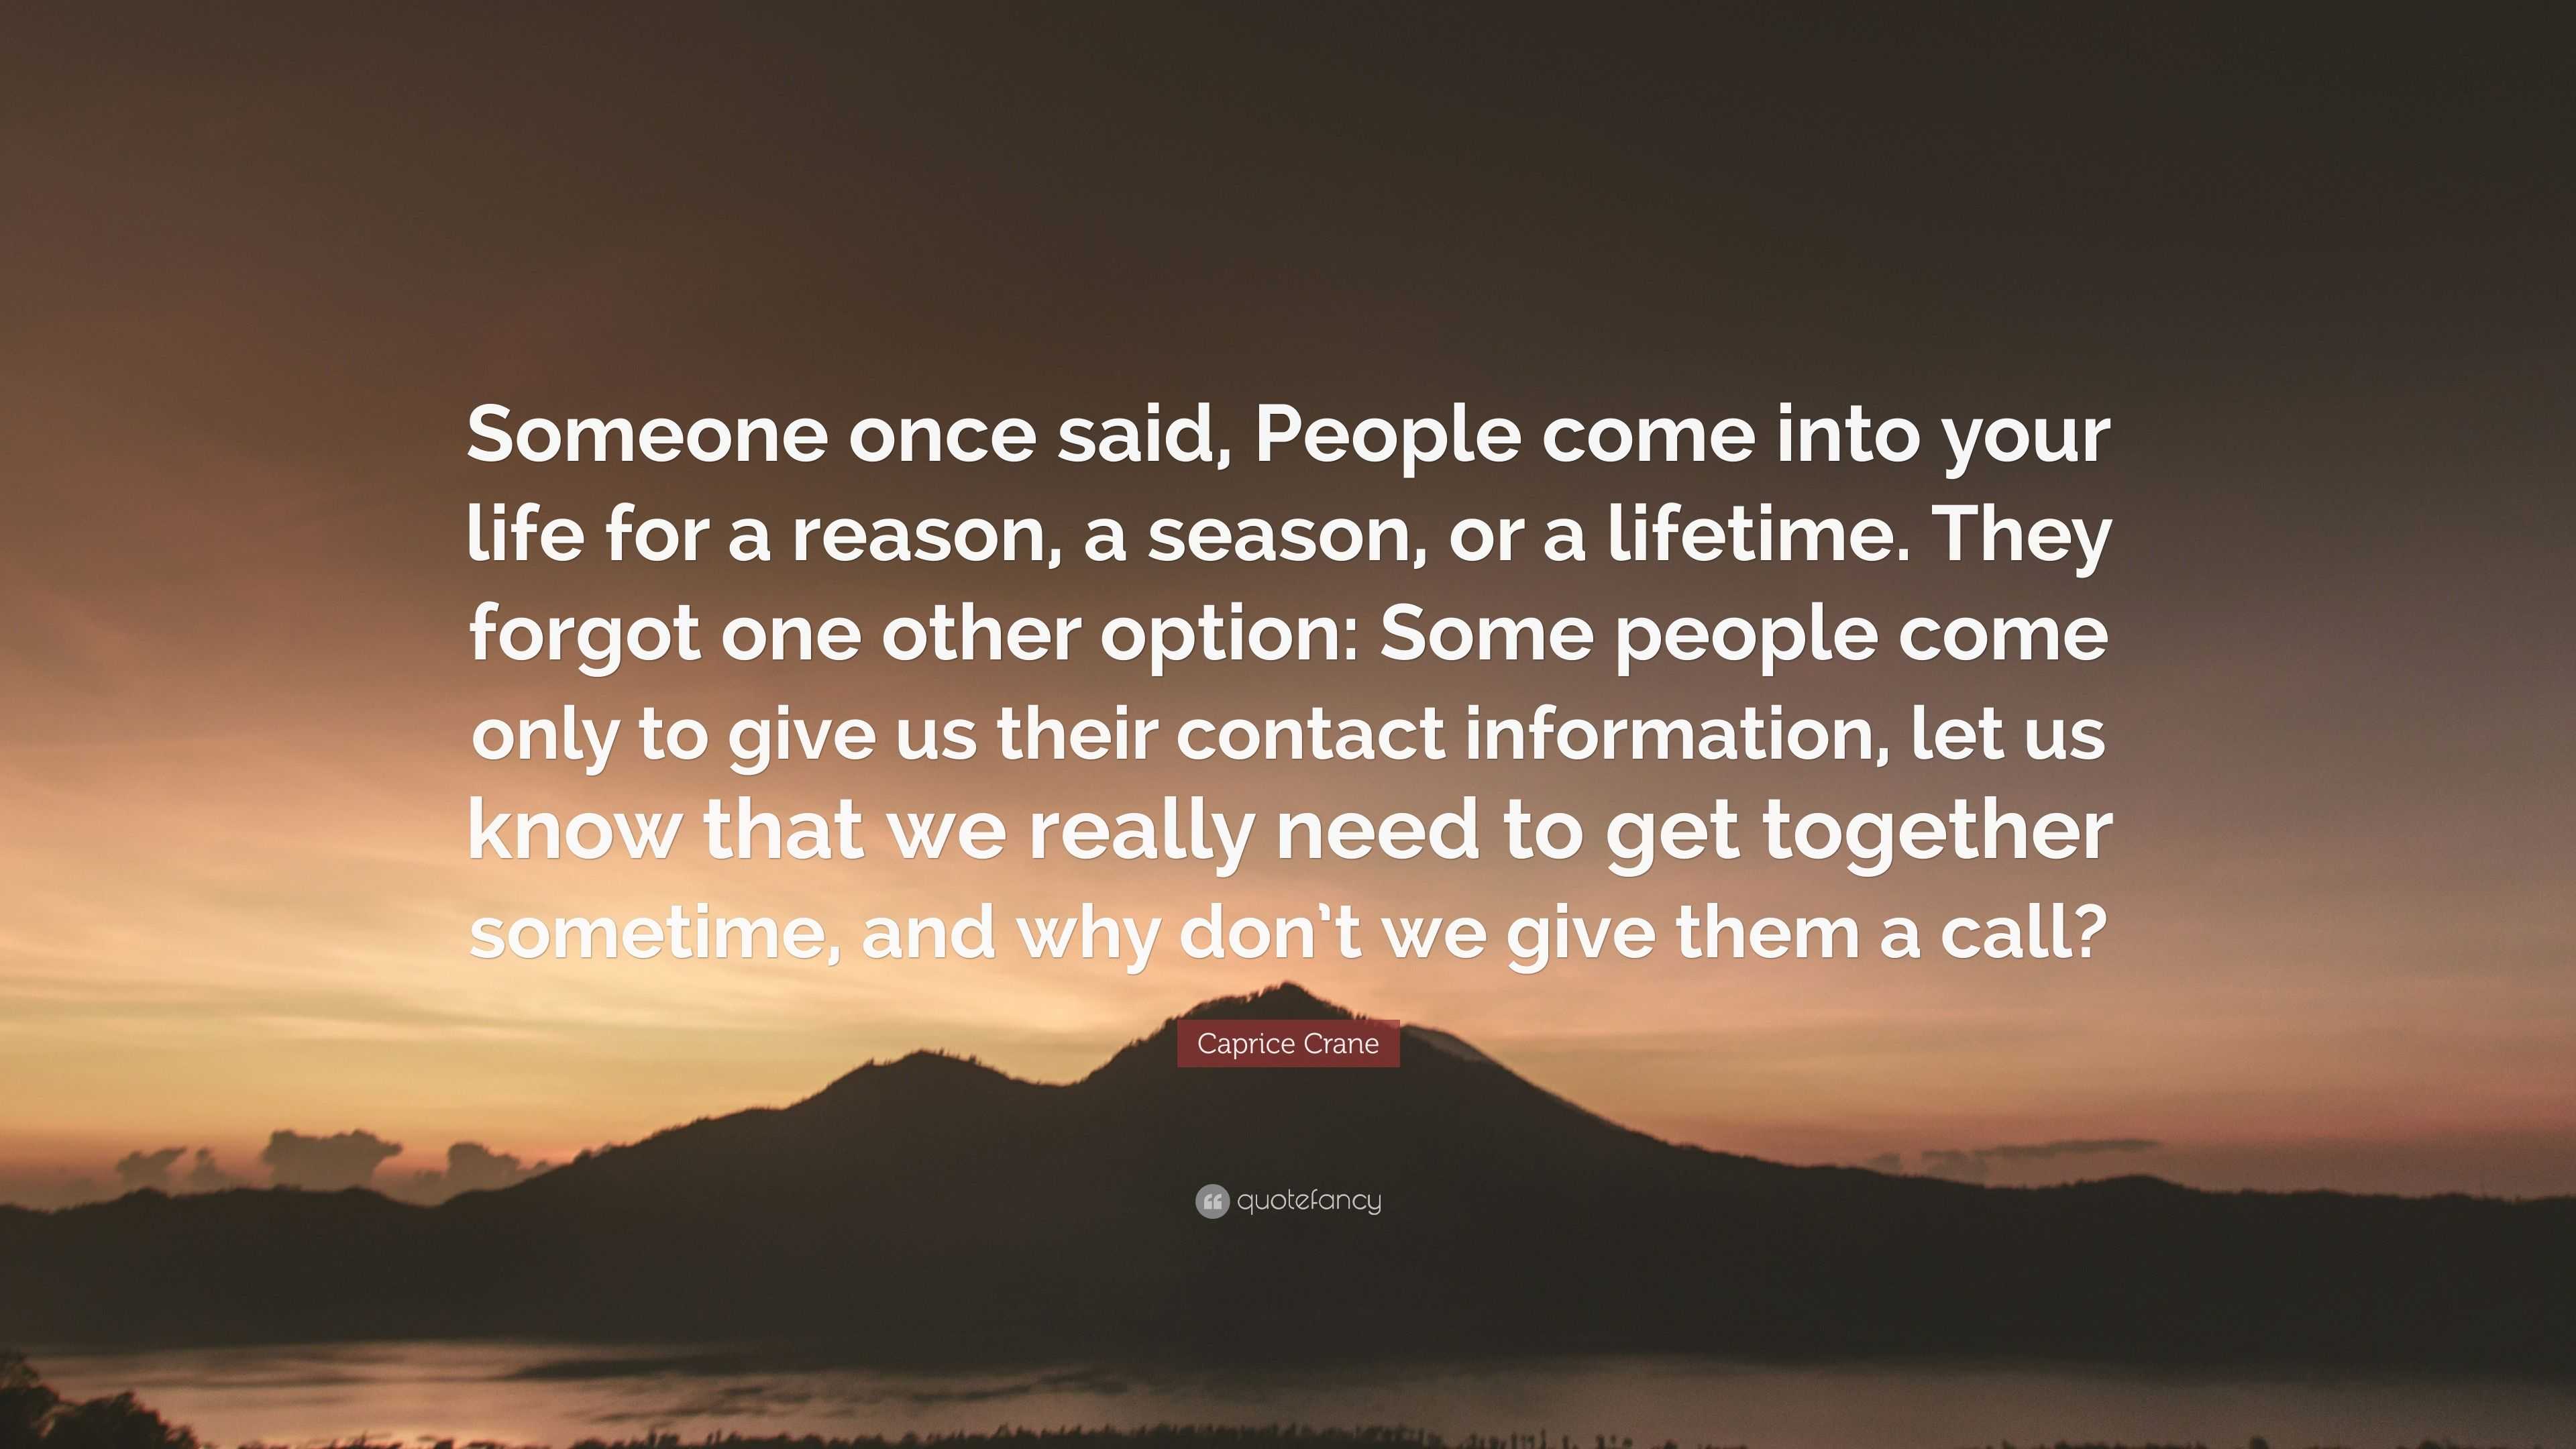 Caprice Crane Quote “Someone once said People e into your life for a